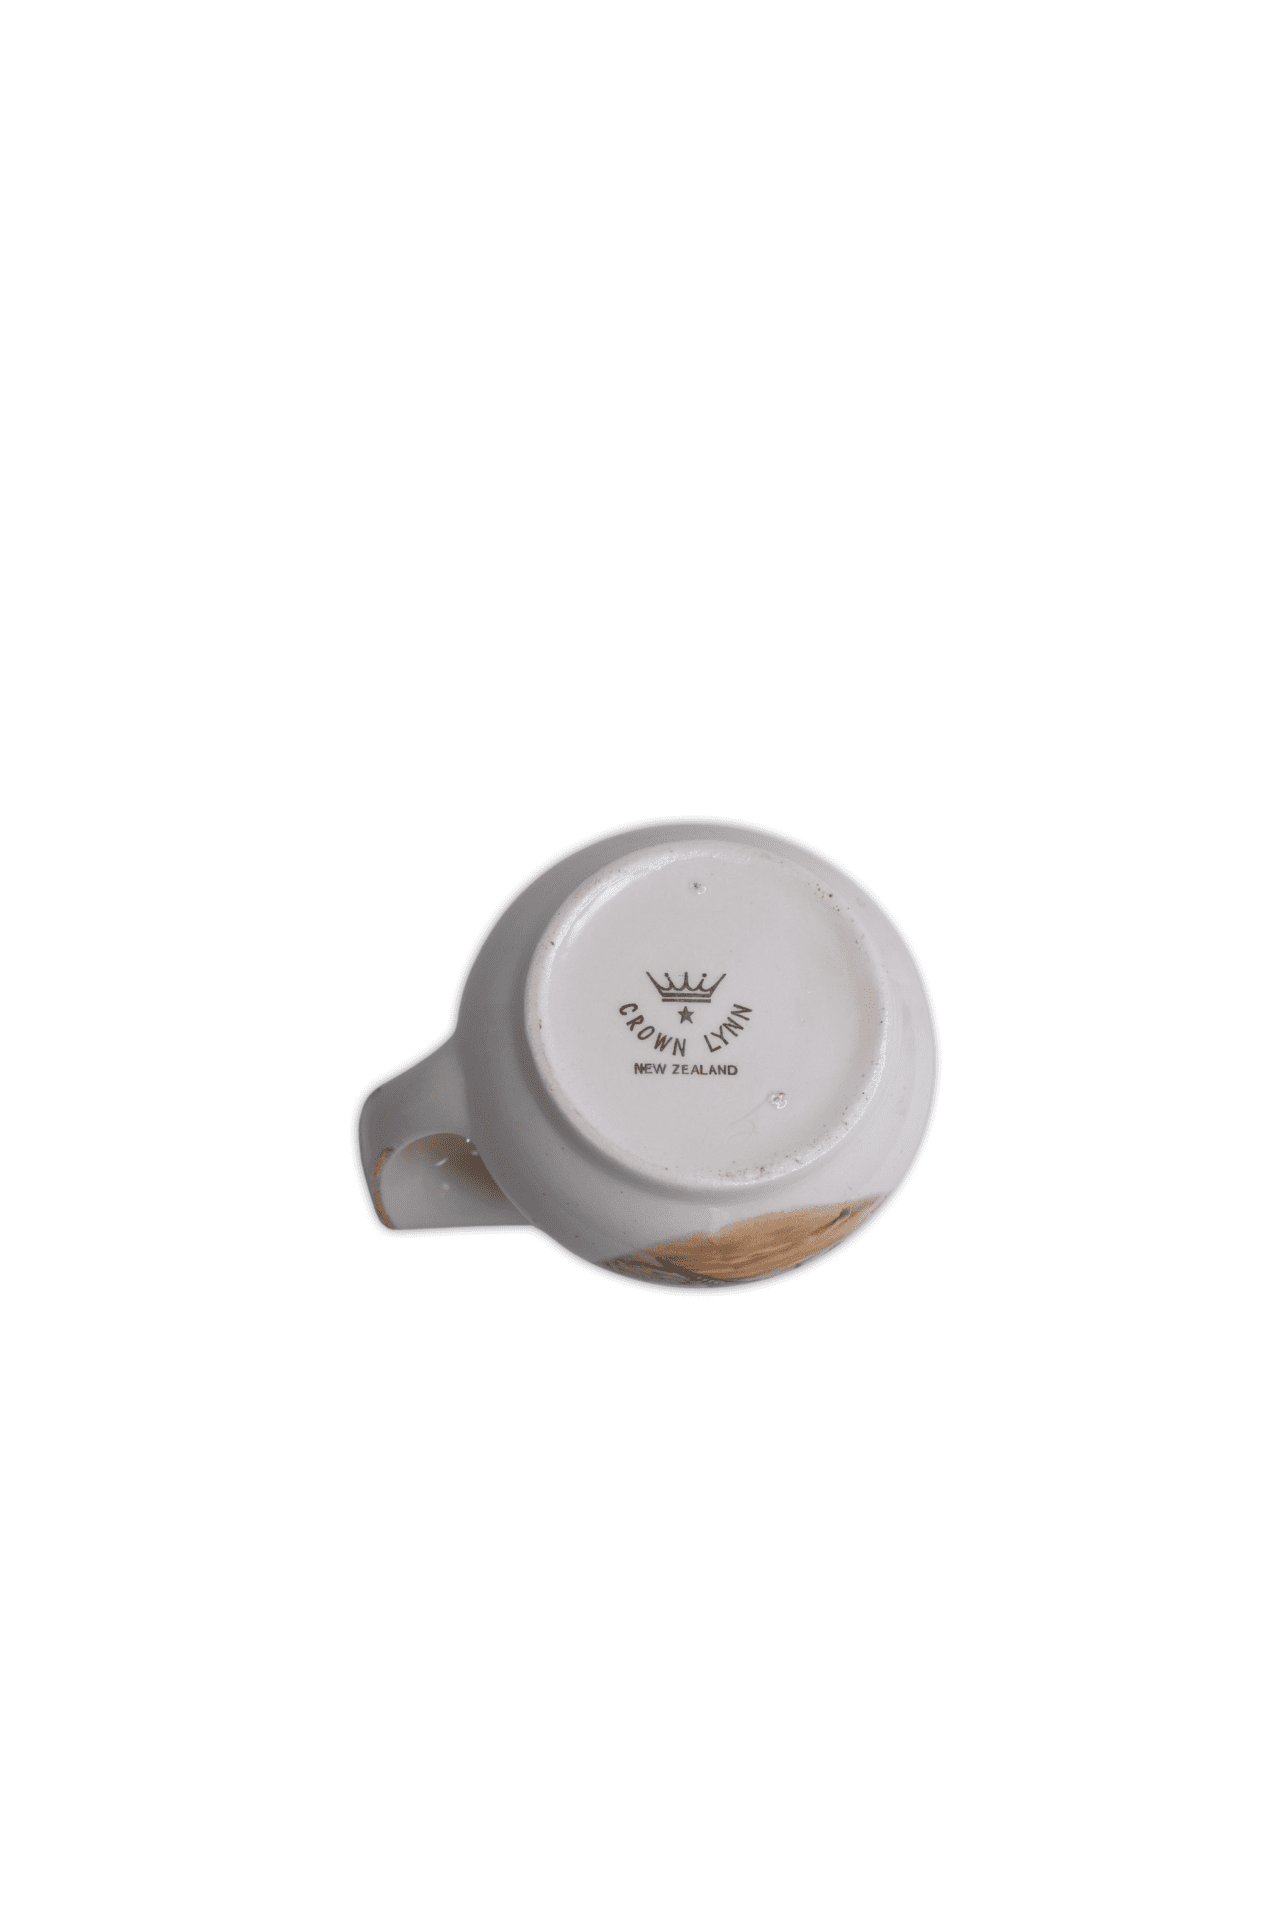 Classic shaving mug to hold your shaving brush featuring a gold trim and pheasant's print on the side.